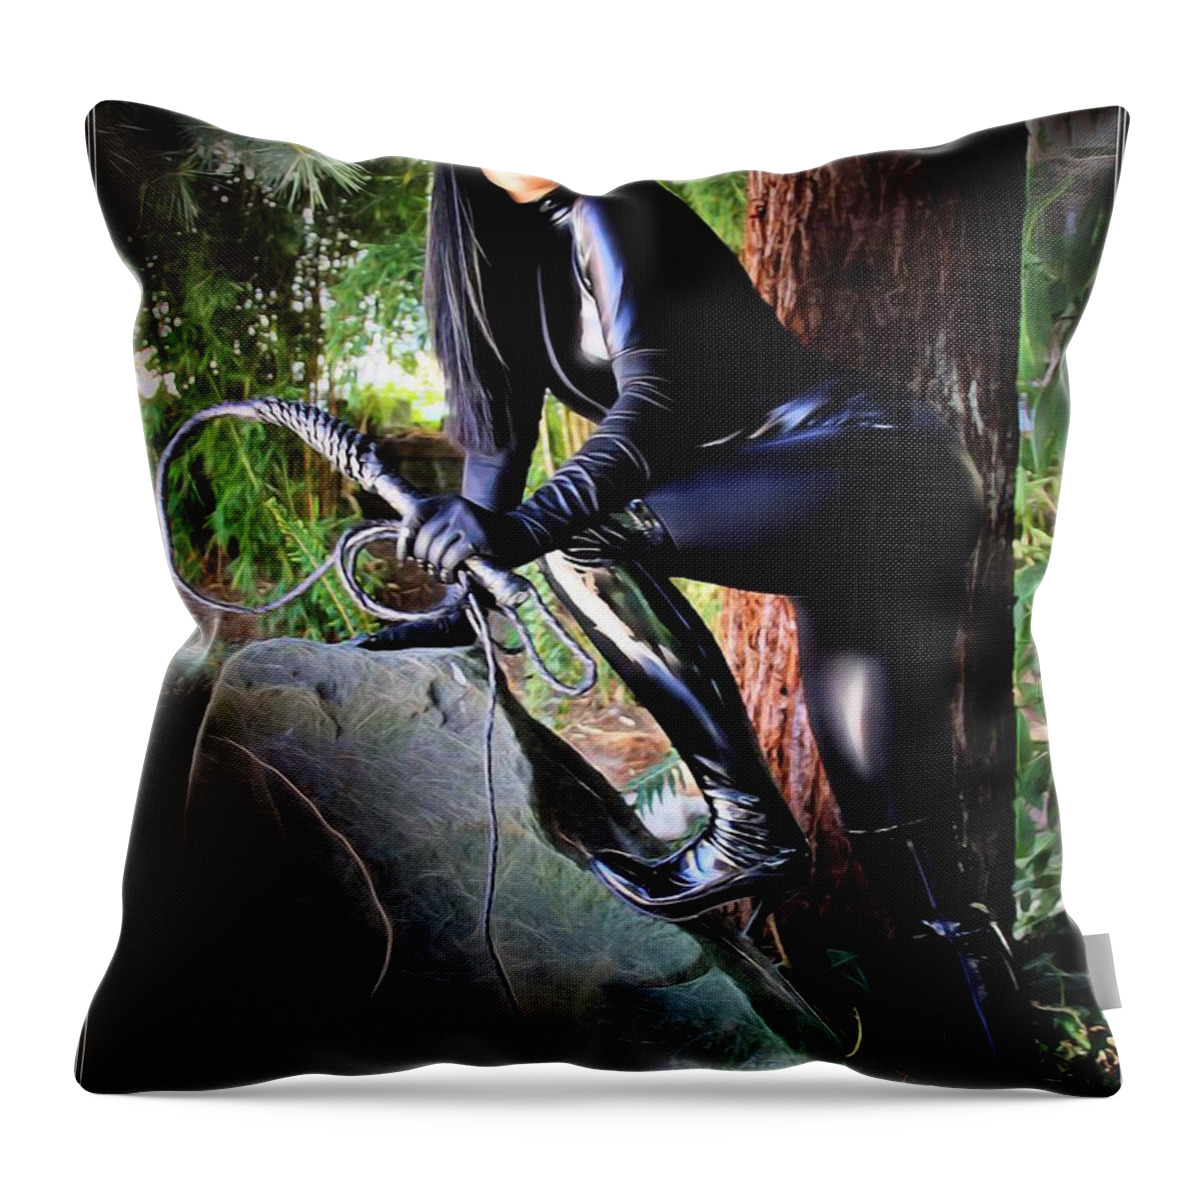 Fantasy Throw Pillow featuring the painting Feline Fatale On The Prowl by Jon Volden